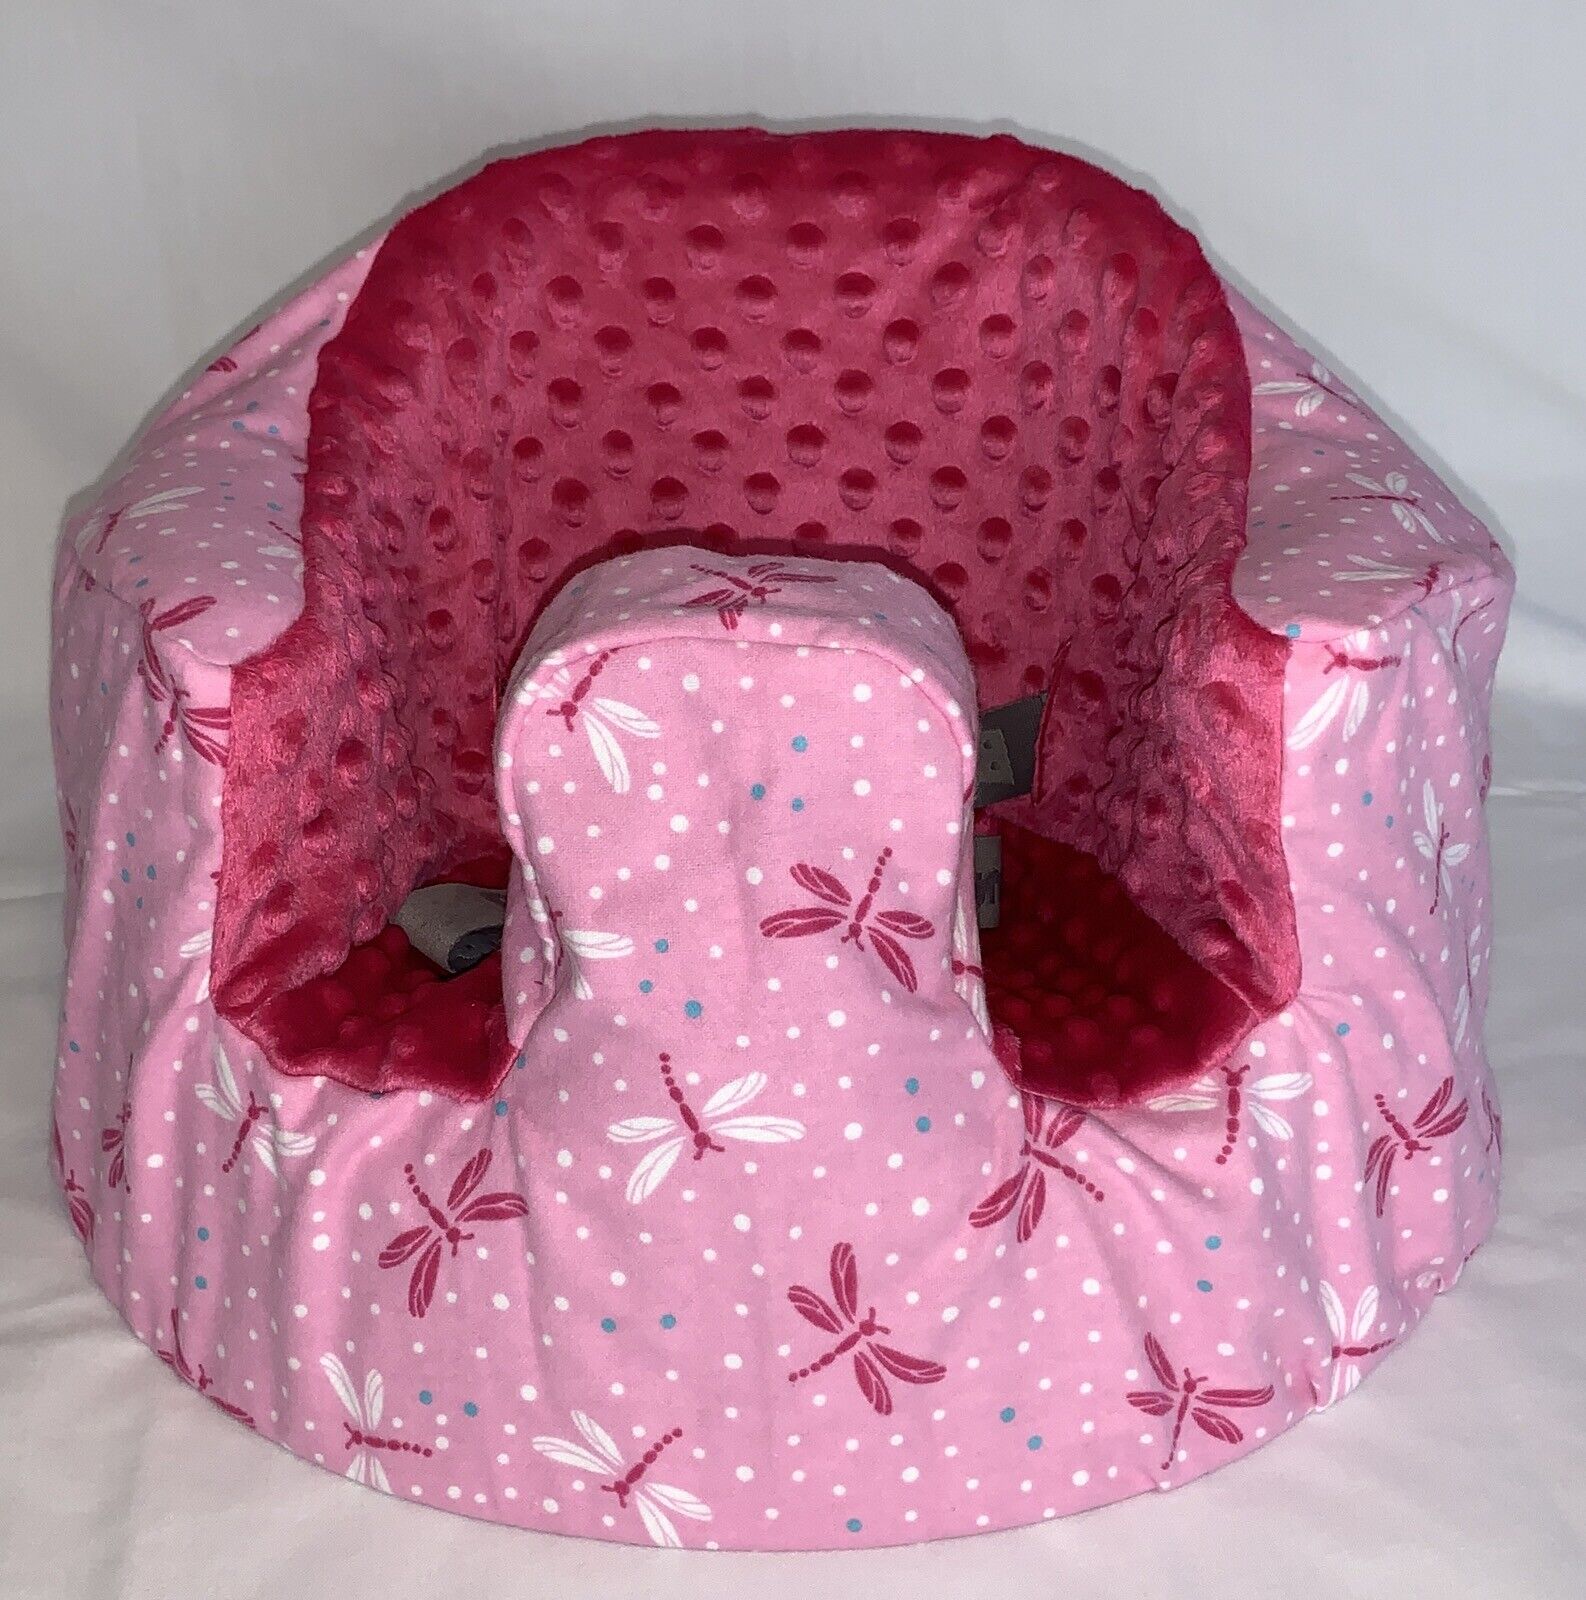 New Bumbo Floor Seat Cover • Polka Dot Dragonflies • Safety Strap Ready